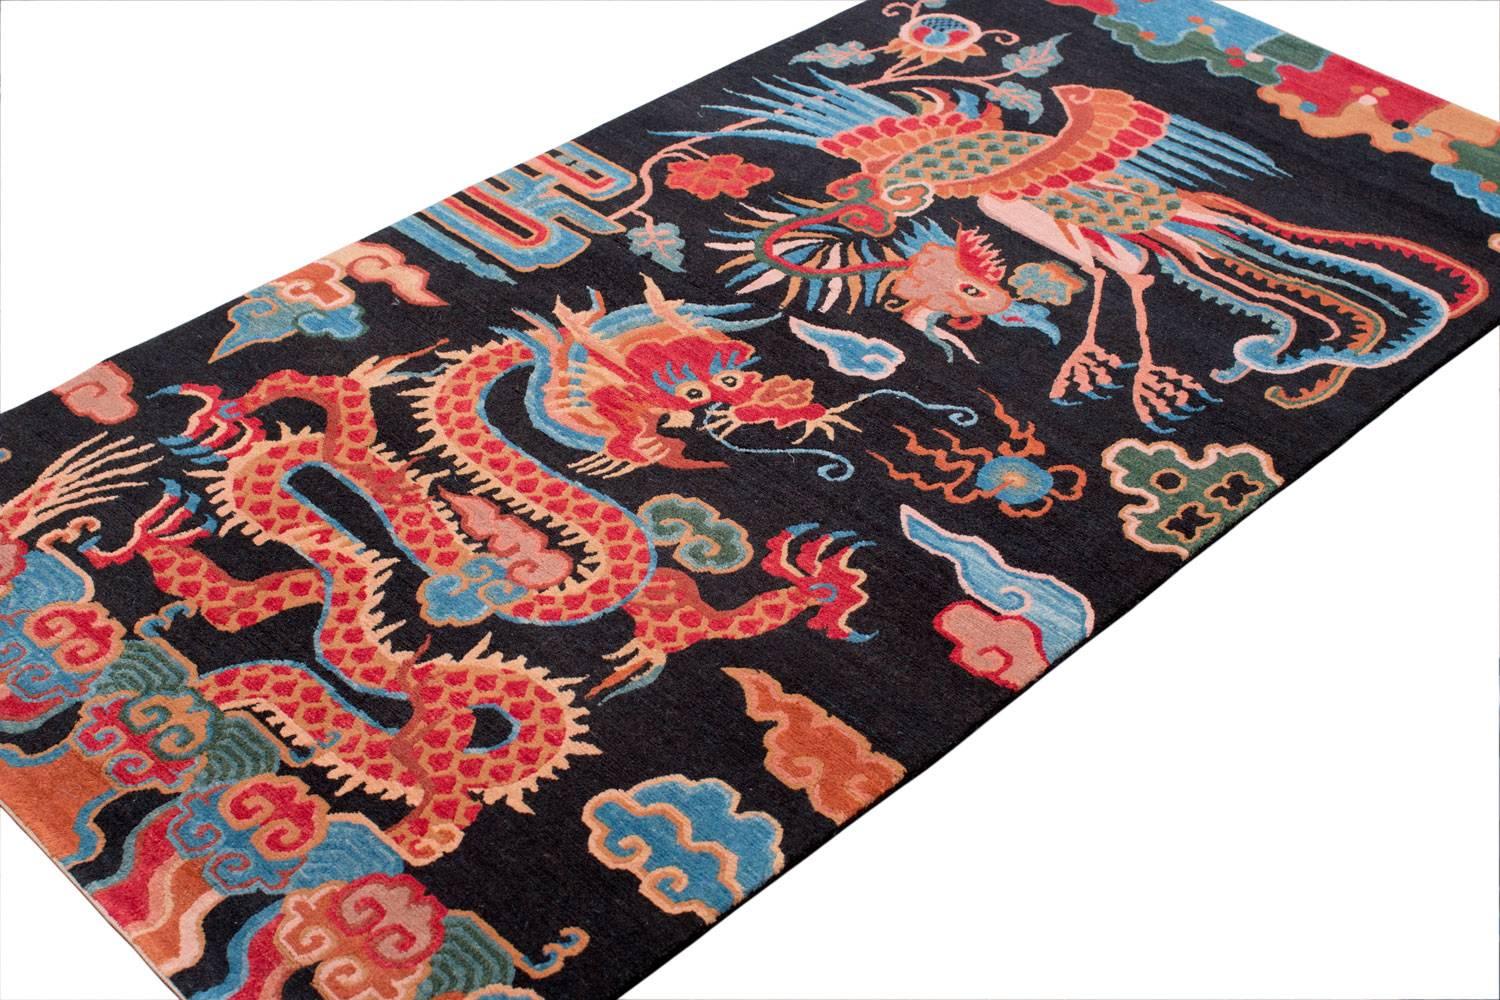 This showstopper carpet is an original design by Joseph Carini. Inspired by his deep love for the arts and culture in China, this design was originally titled 'Chinese New Year). This 3 feet by 6 feet carpet has an oriental motif of dragons and